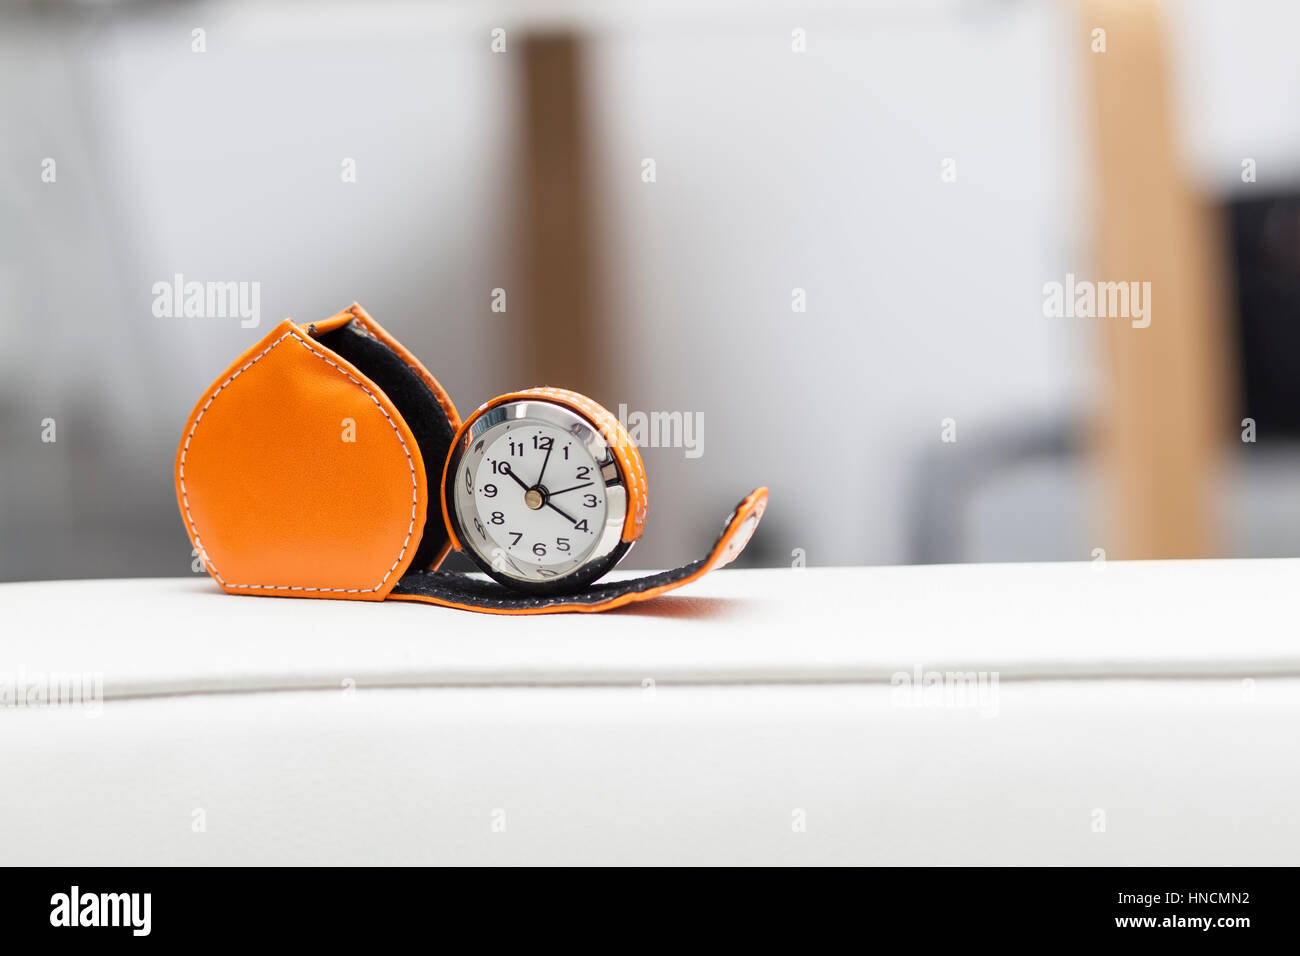 Small pocket watch with leather orange case on white surface, isolated with blurred background office style Stock Photo